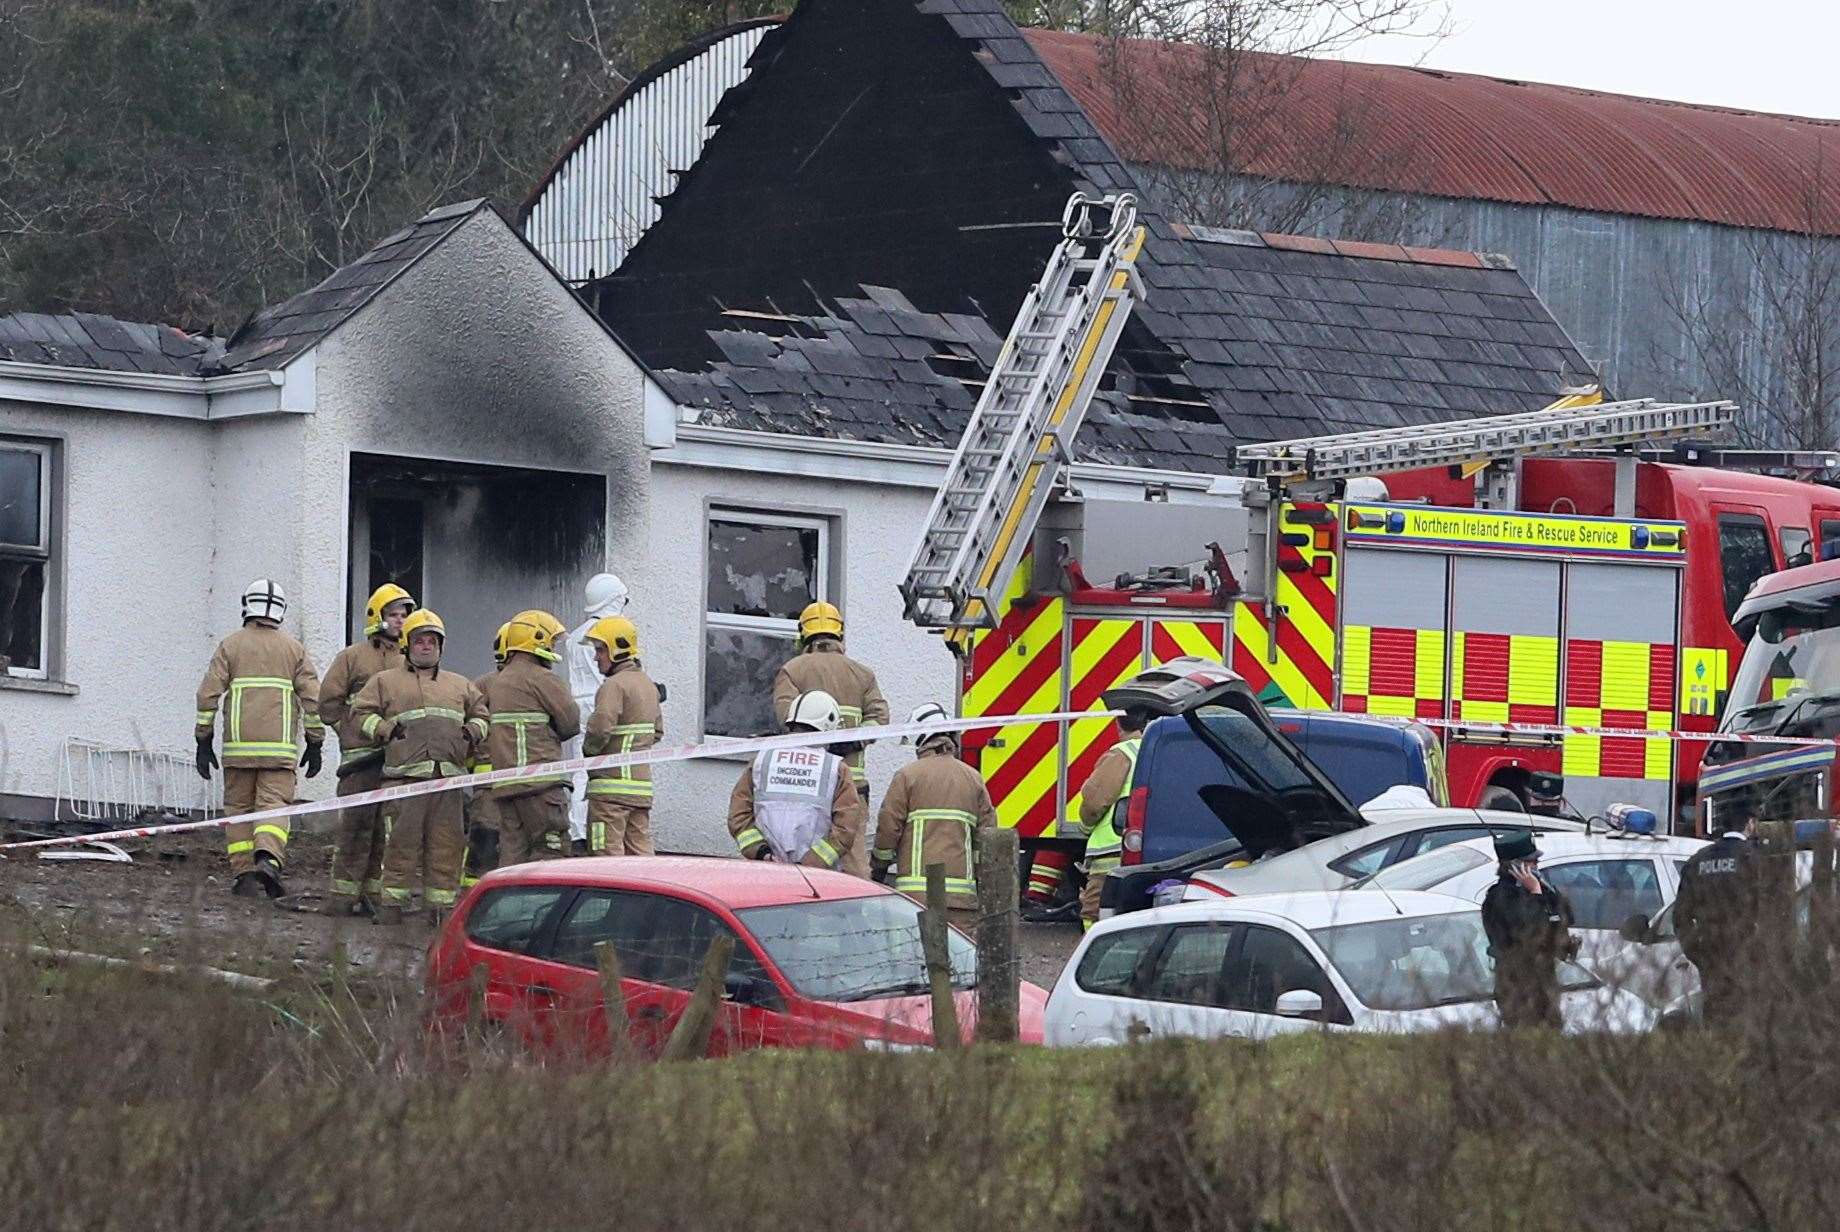 The fire at the house in Derrylin happened on February 27 2018 (Brian Lawless/PA)